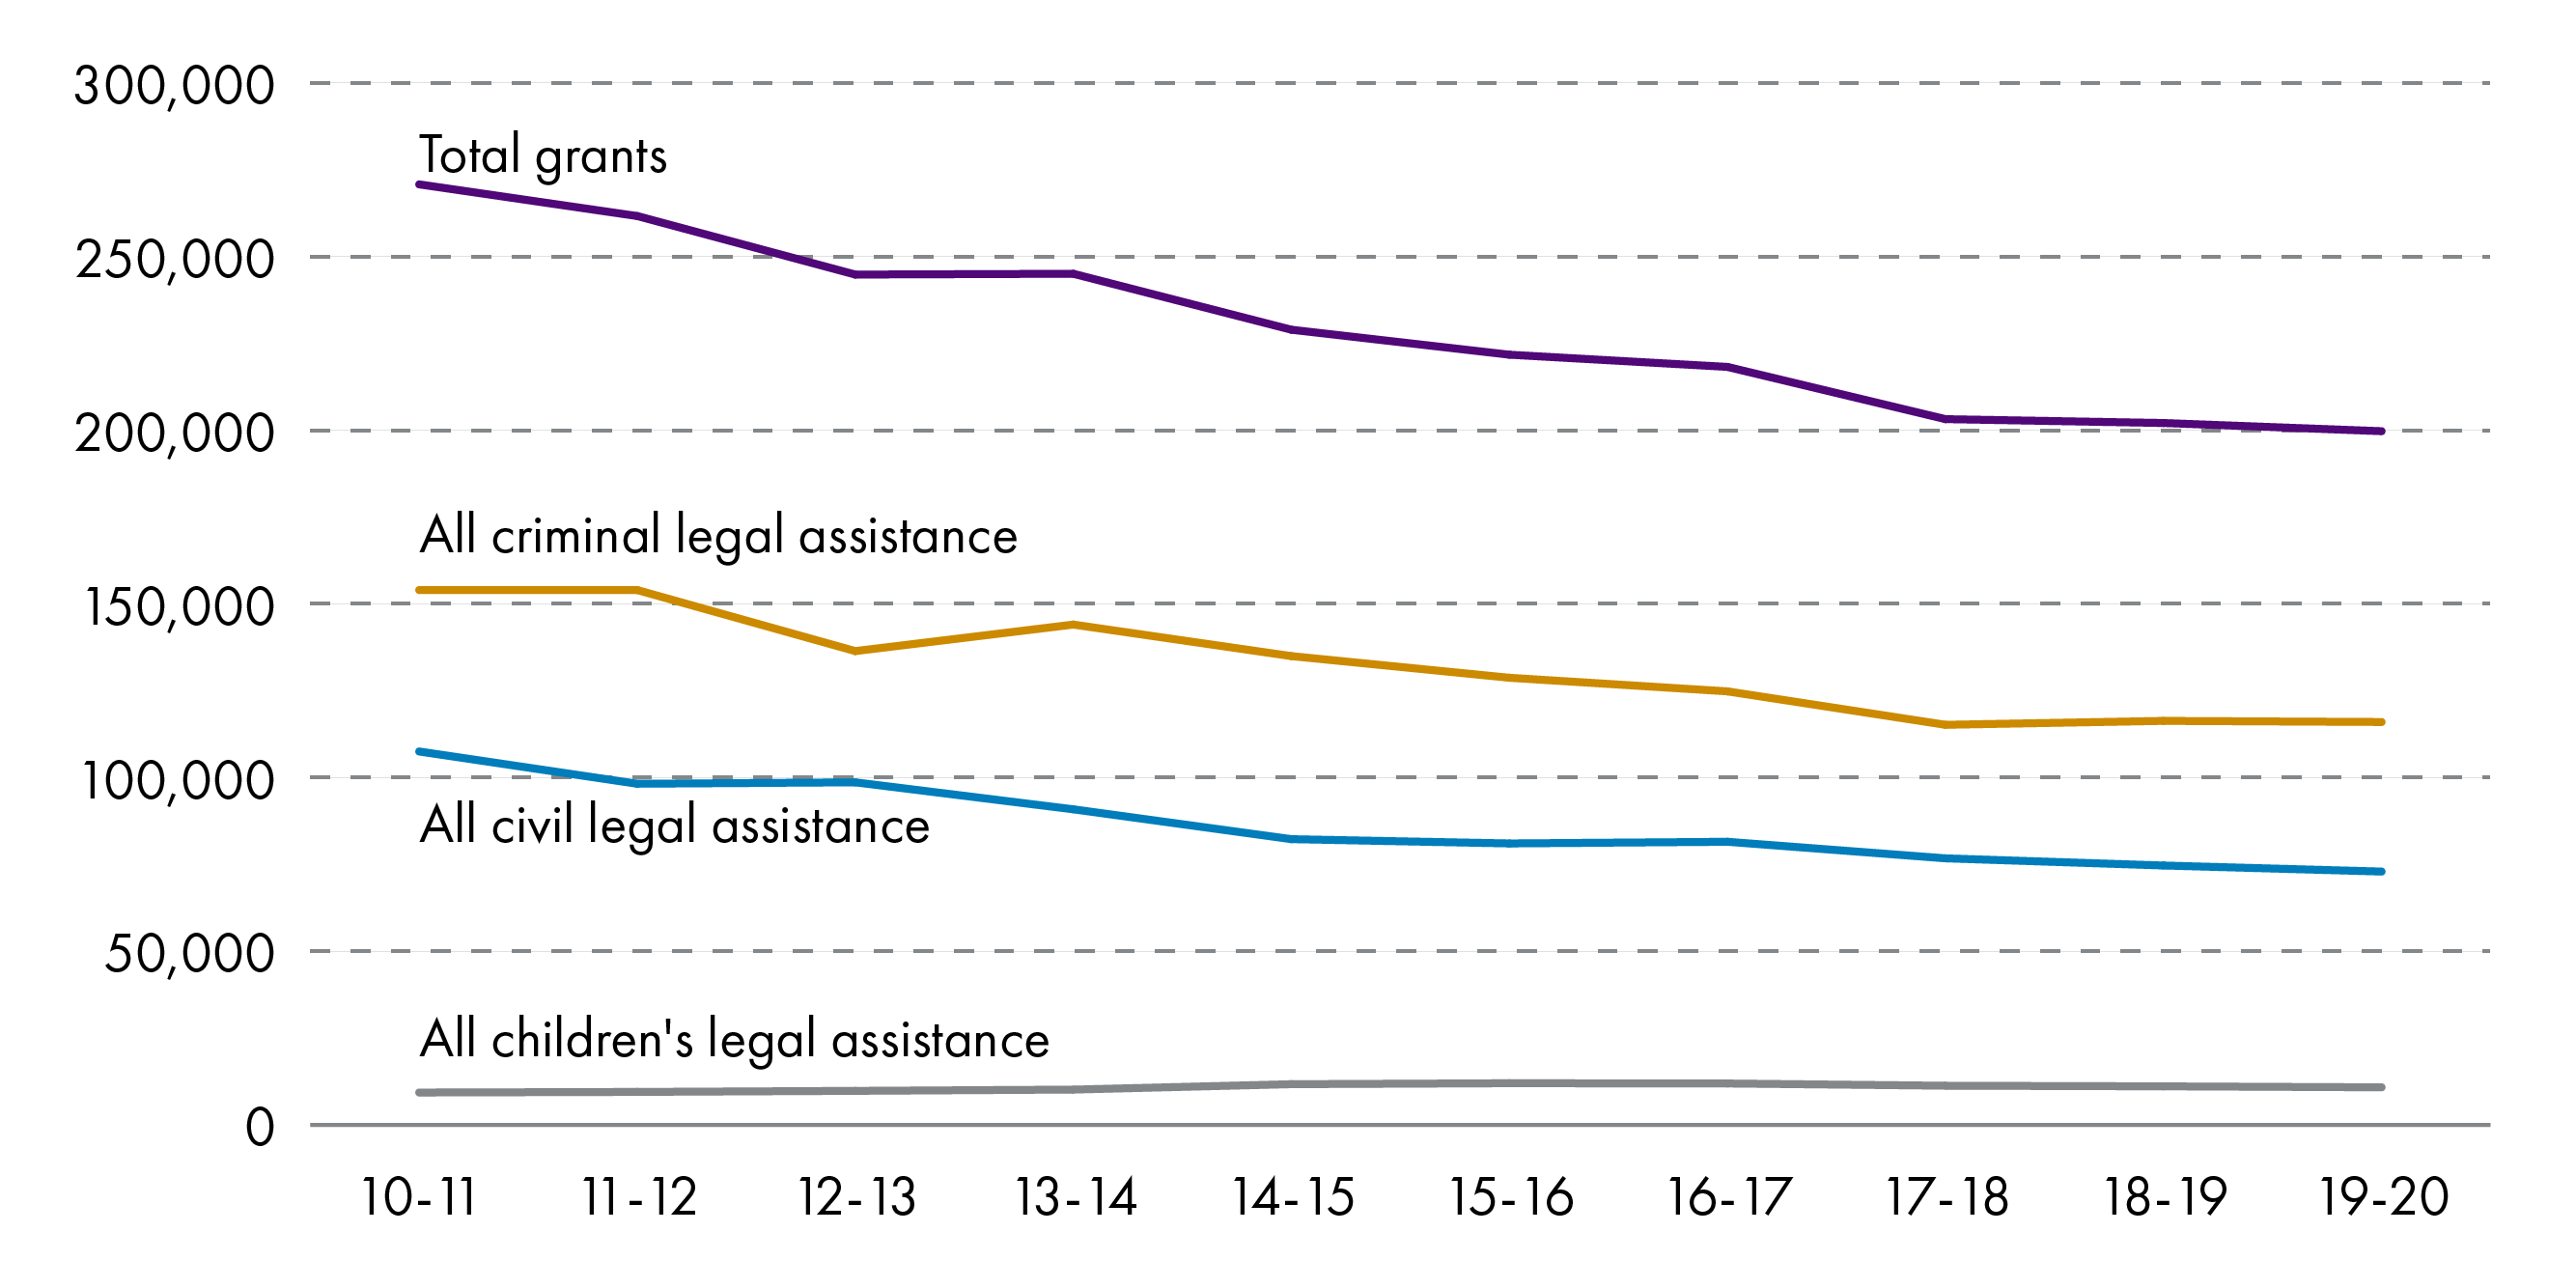 The number of legal aid applications granted between 2010-11 and 2019-20 has shown a broadly downwards trend.